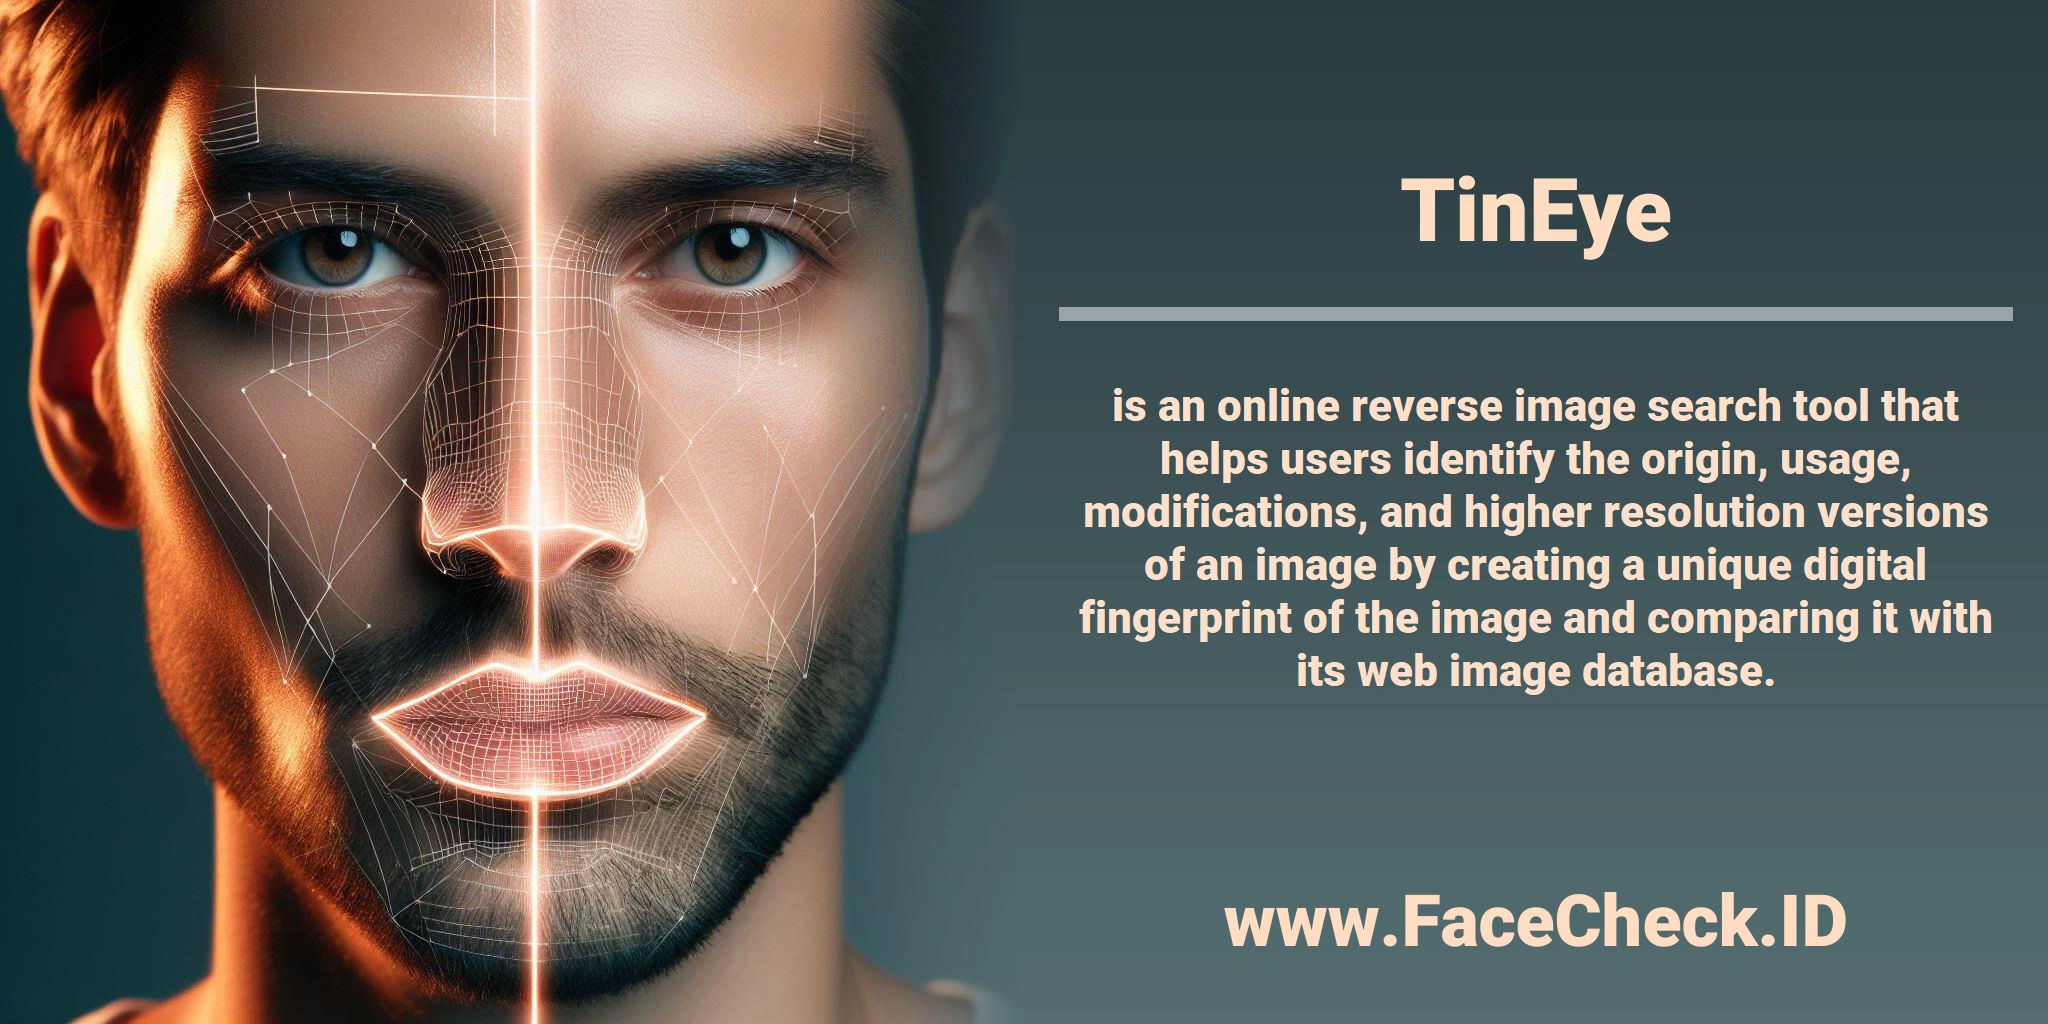 <b>TinEye</b> is an online reverse image search tool that helps users identify the origin, usage, modifications, and higher resolution versions of an image by creating a unique digital fingerprint of the image and comparing it with its web image database.